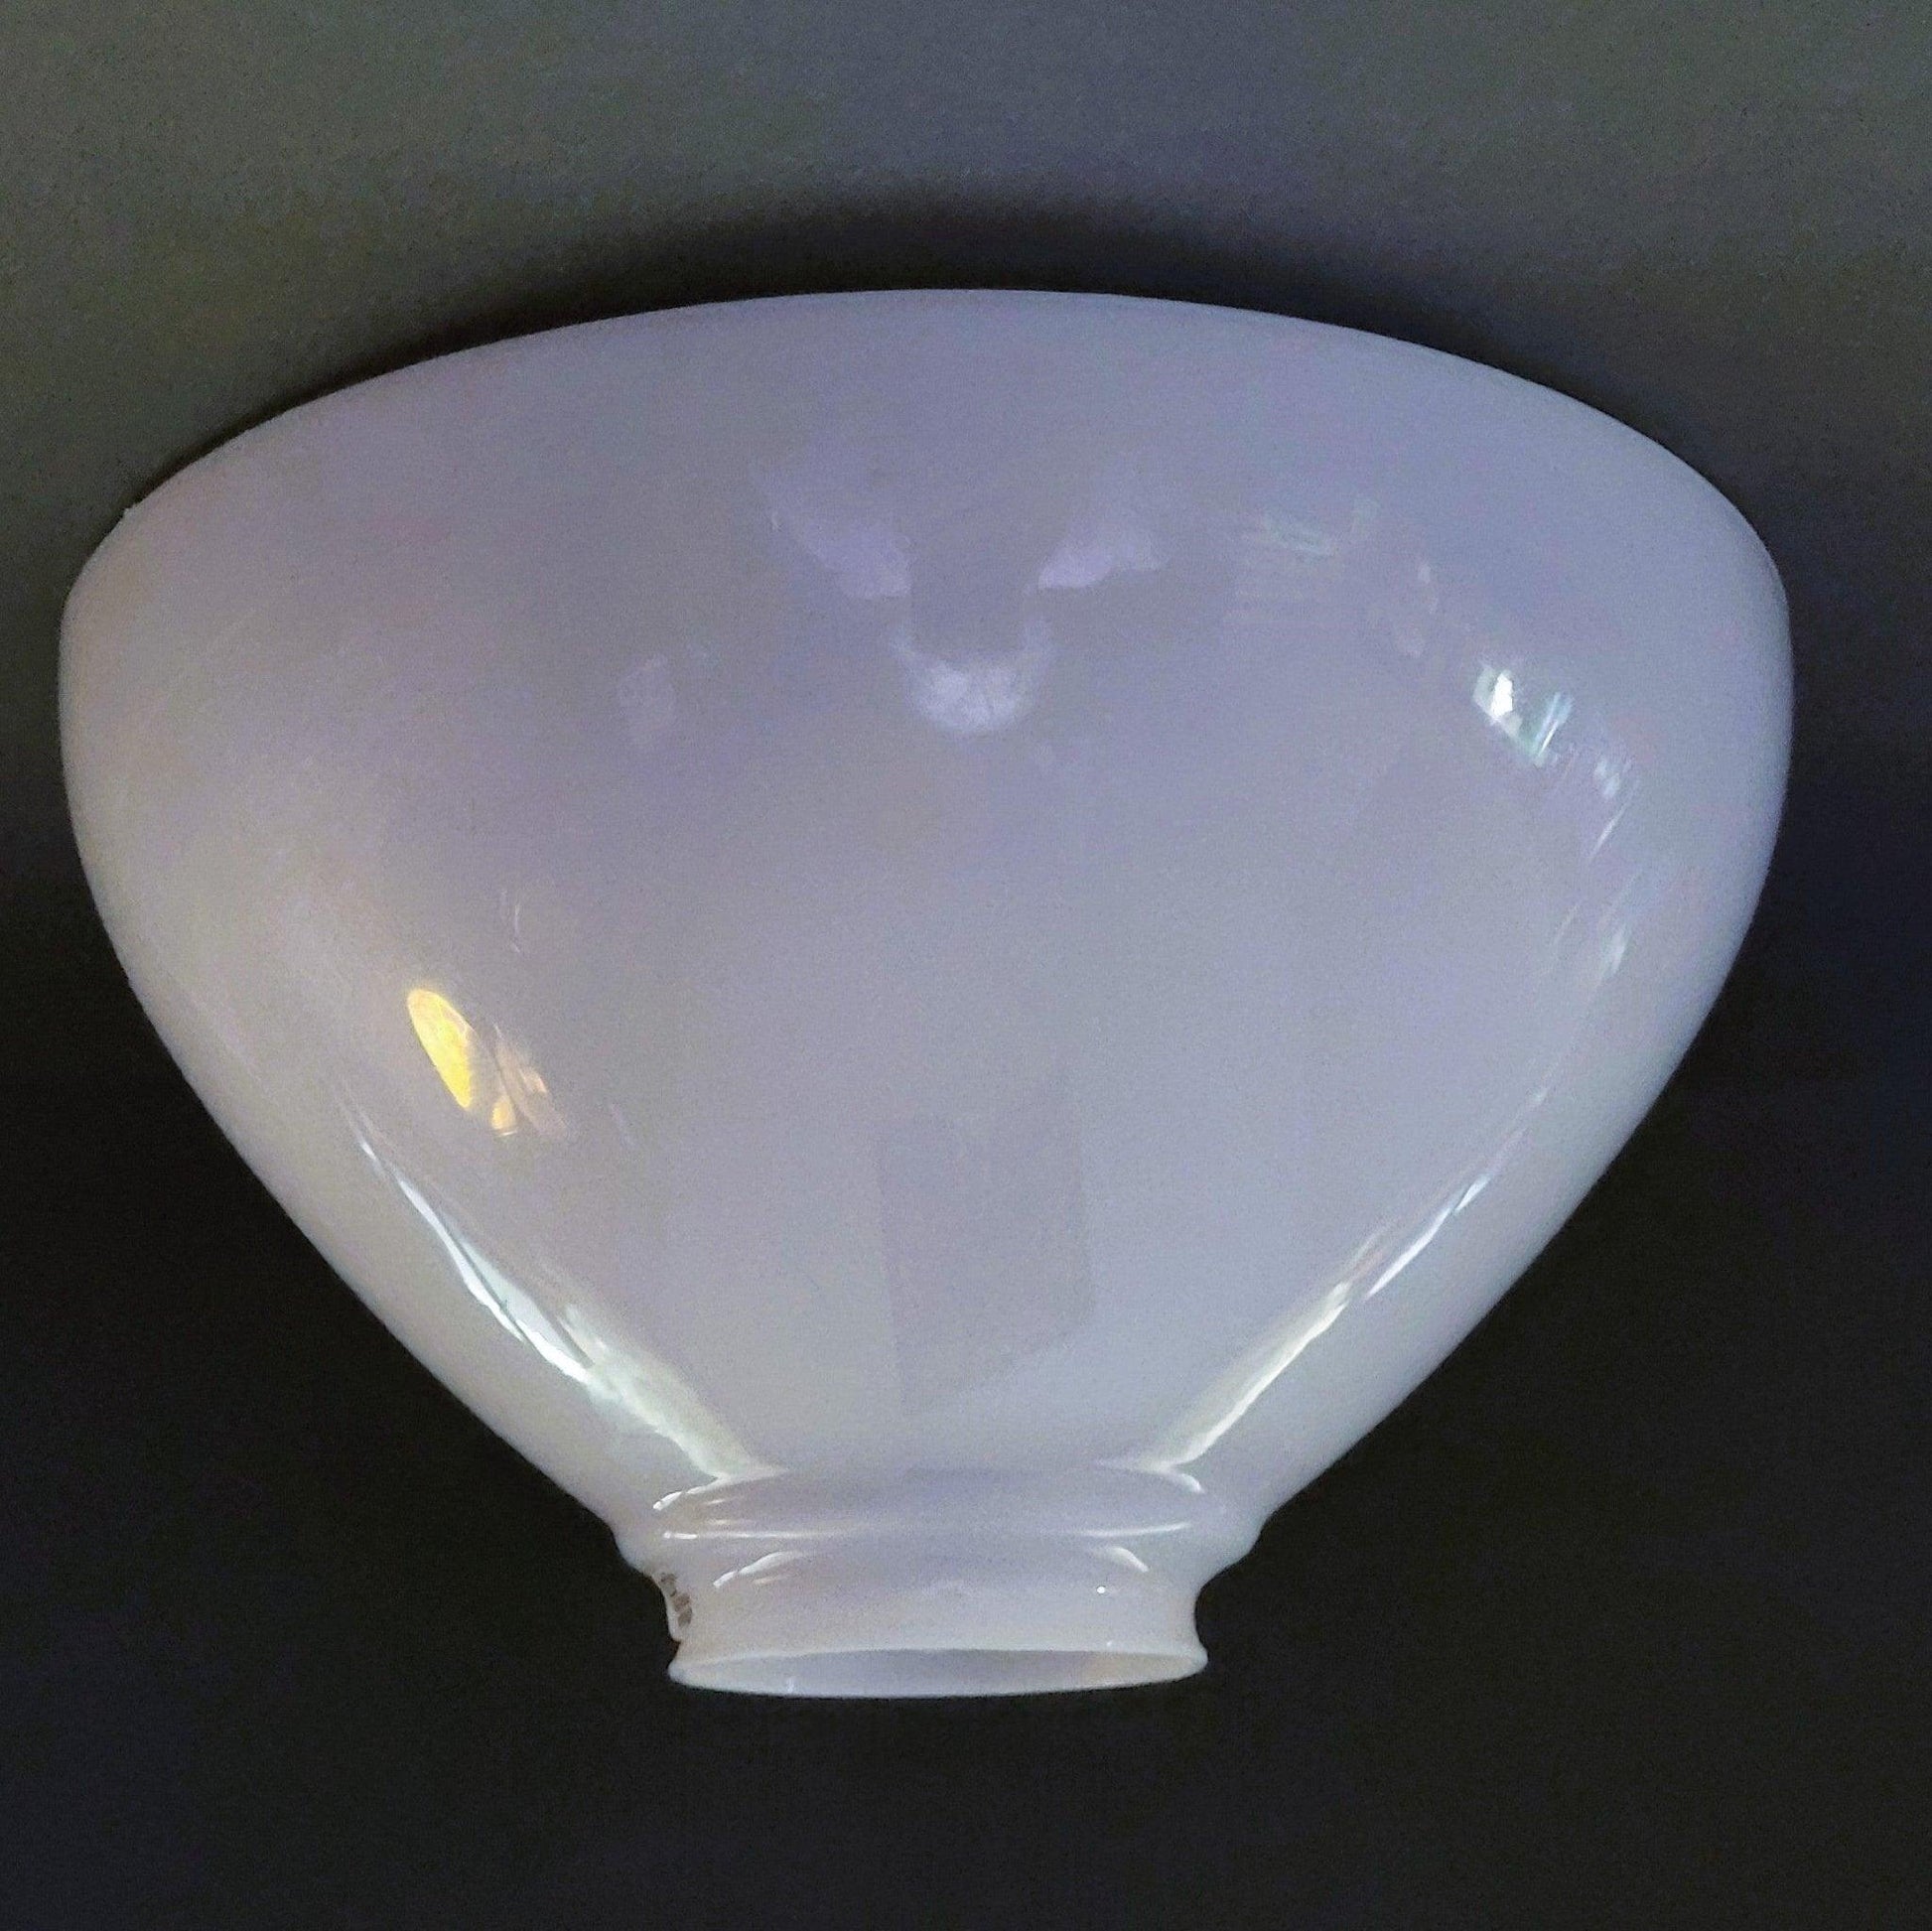 33355 Imported Opal Diffuser - Specialty Shades